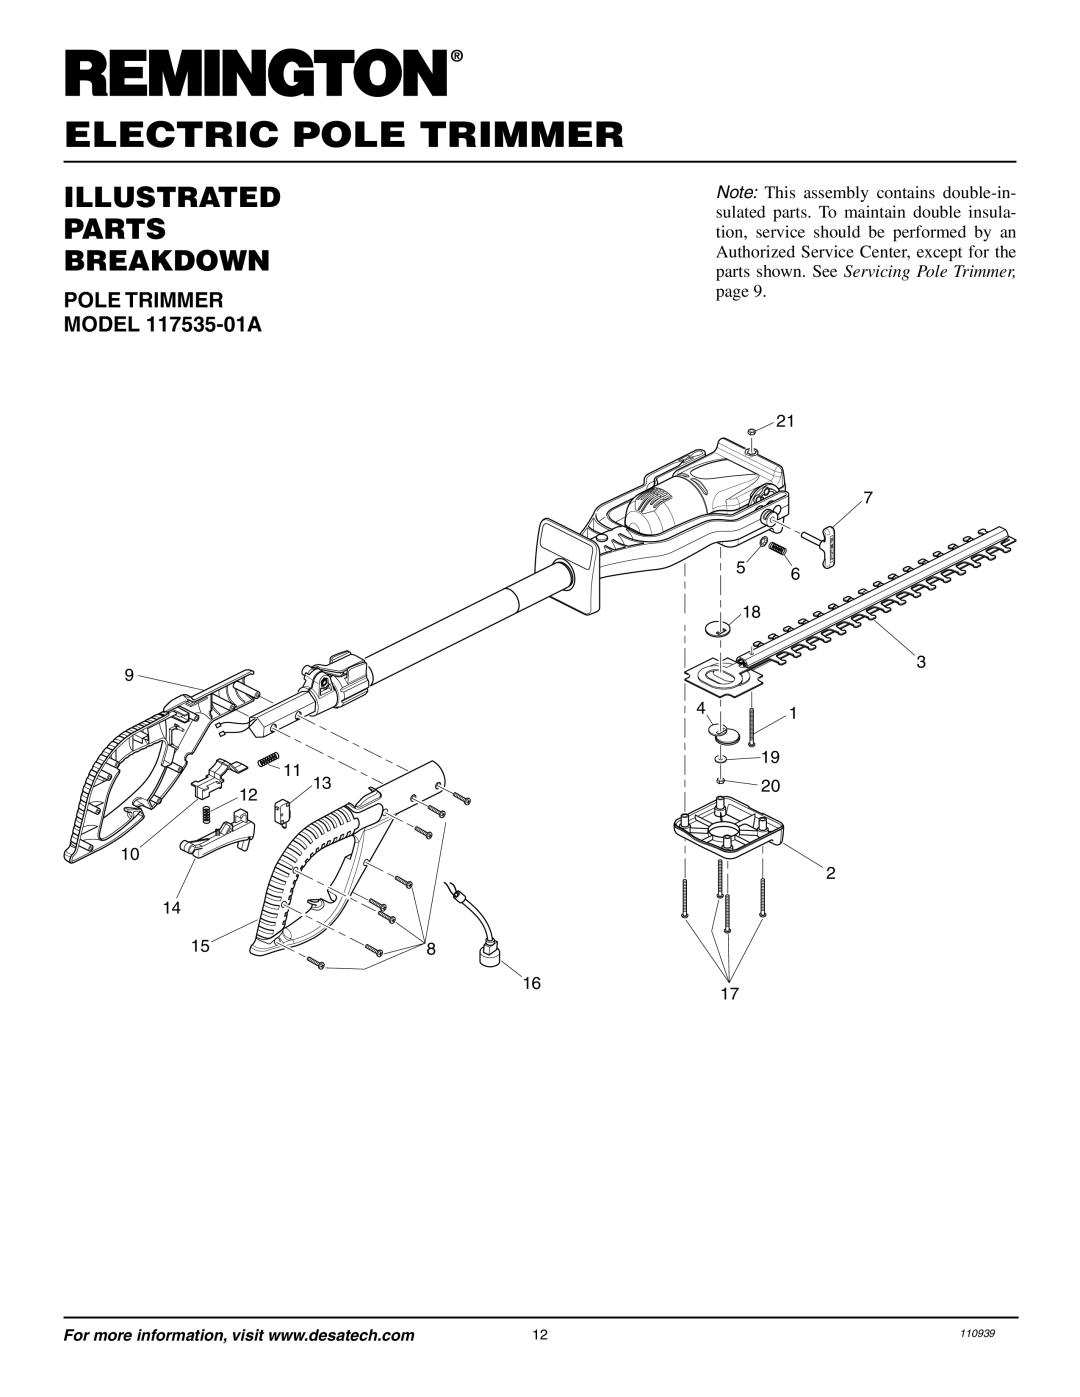 Remington Power Tools Illustrated Parts Breakdown, POLE TRIMMER MODEL 117535-01A, Electric Pole Trimmer, 110939 